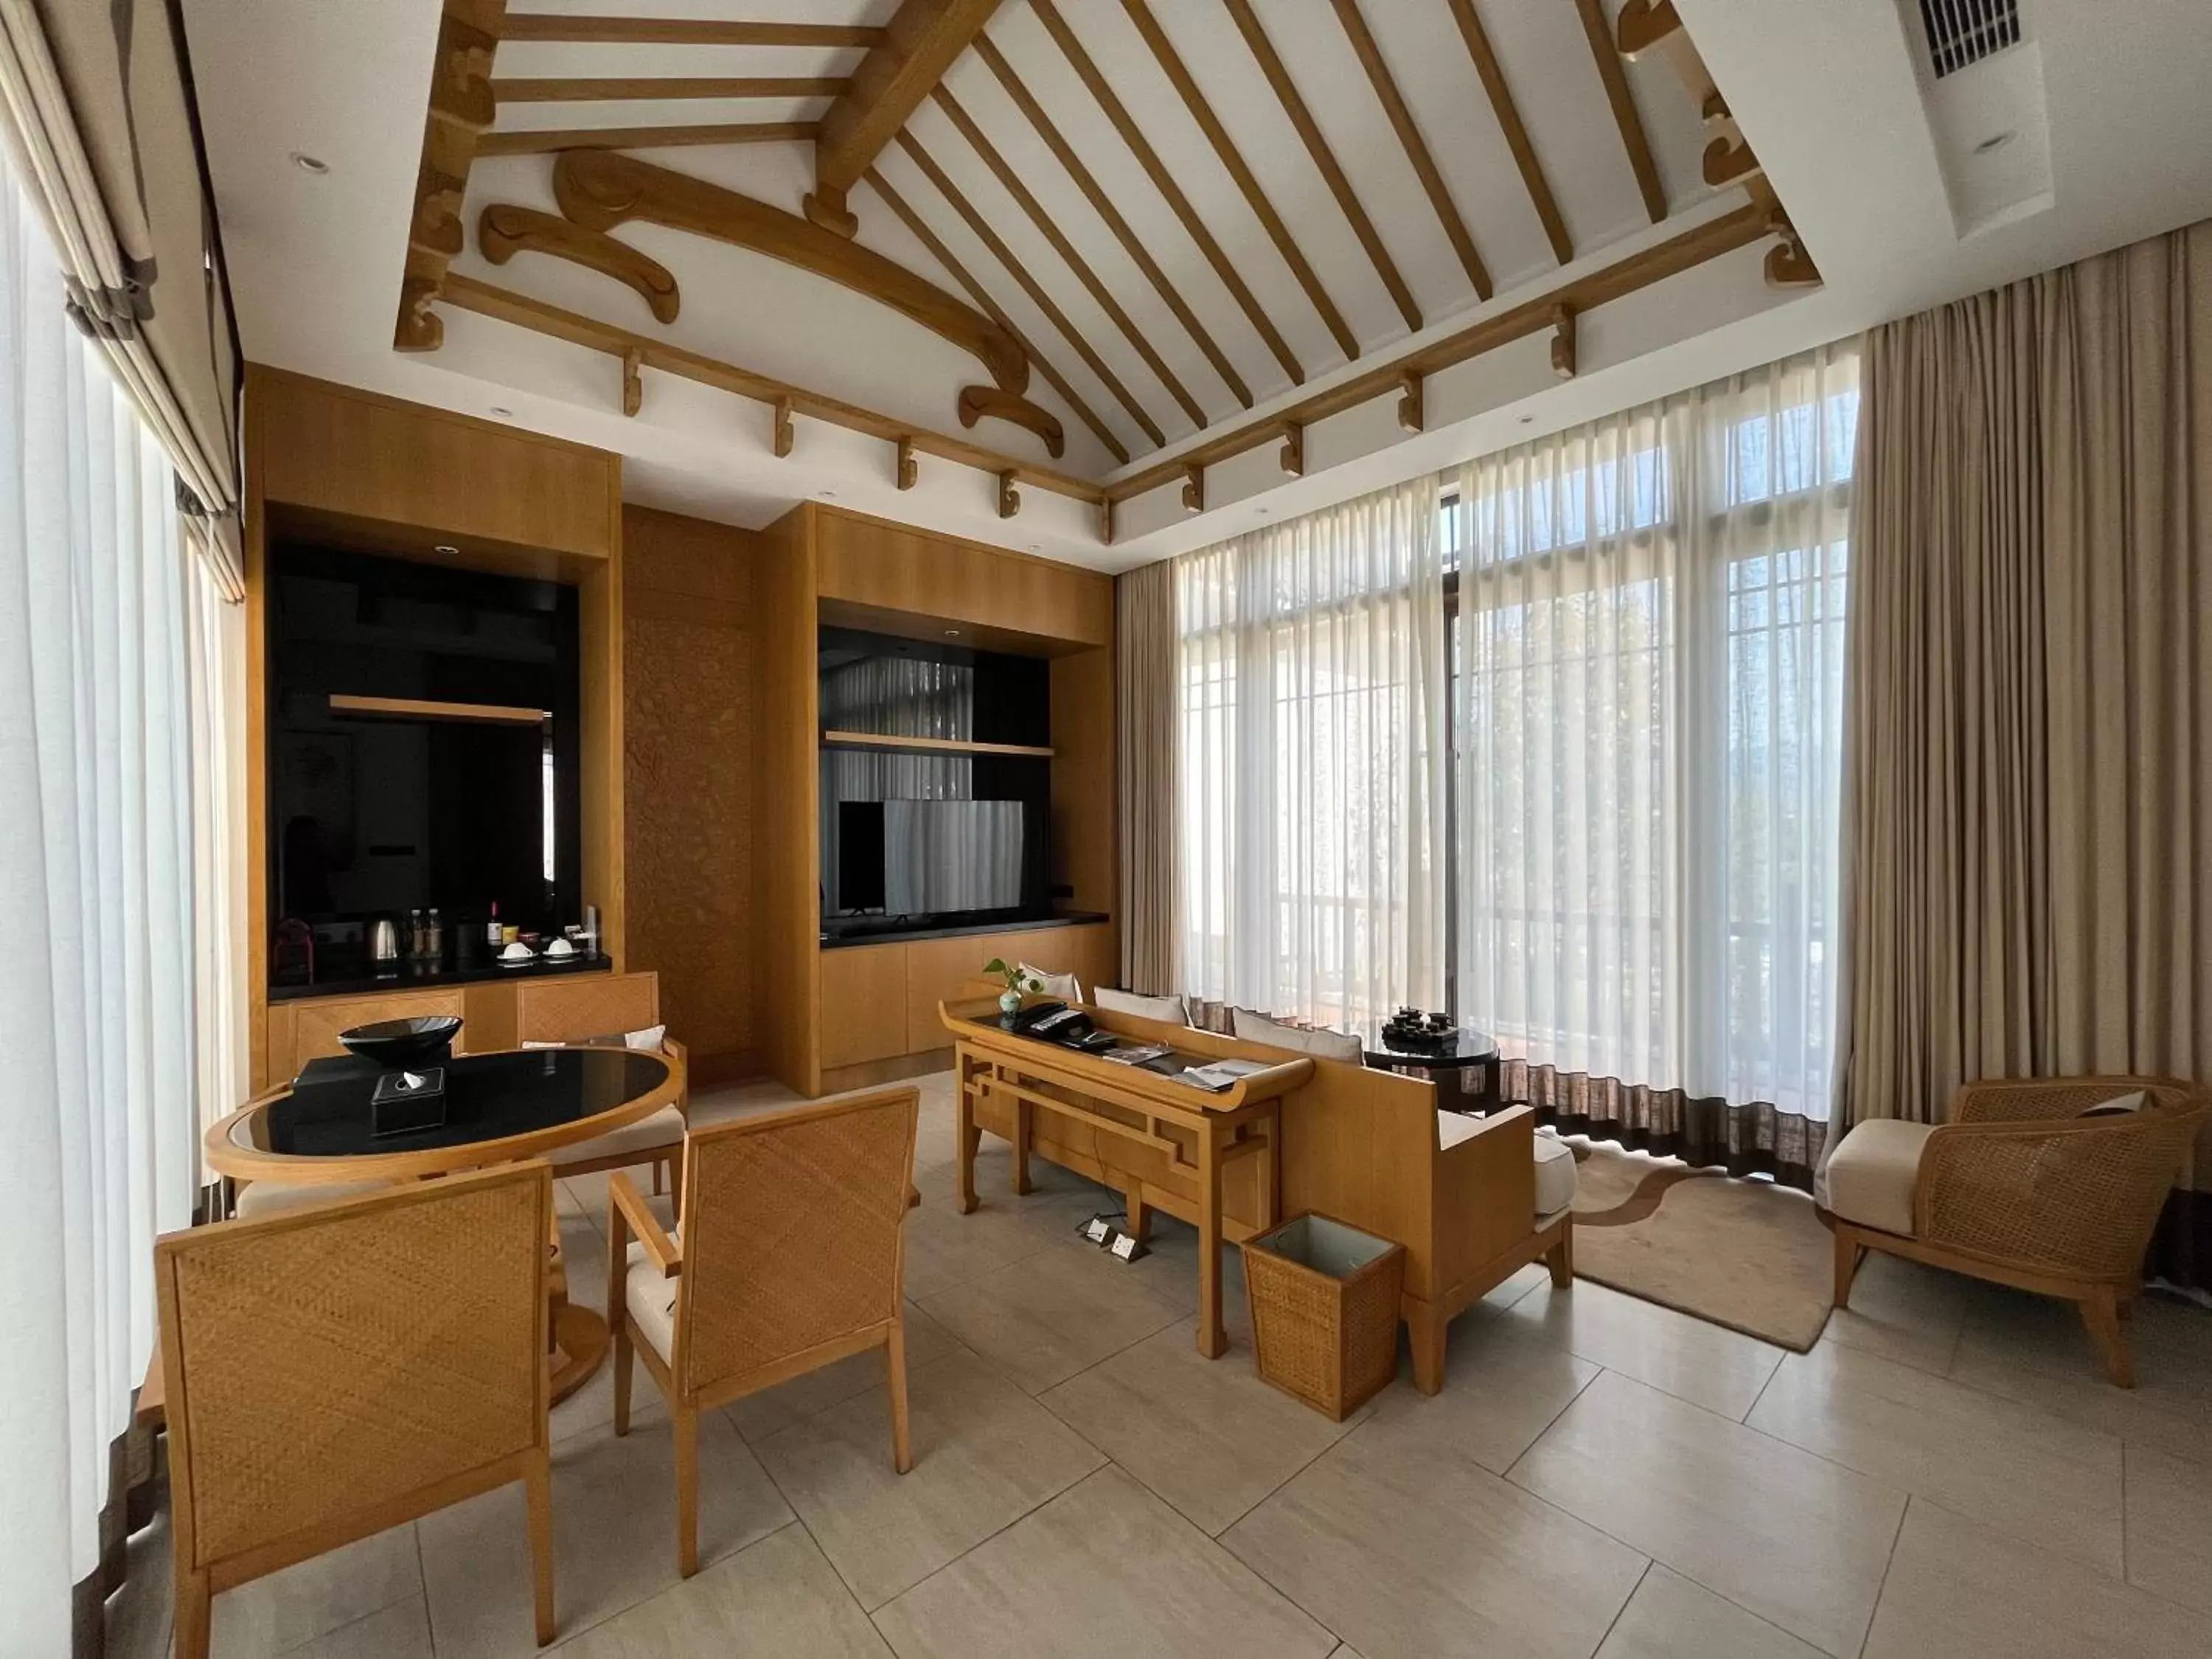 Living room in Banyan Tree Hotel Huangshan-The Ancient Charm of Huizhou, a Paradise